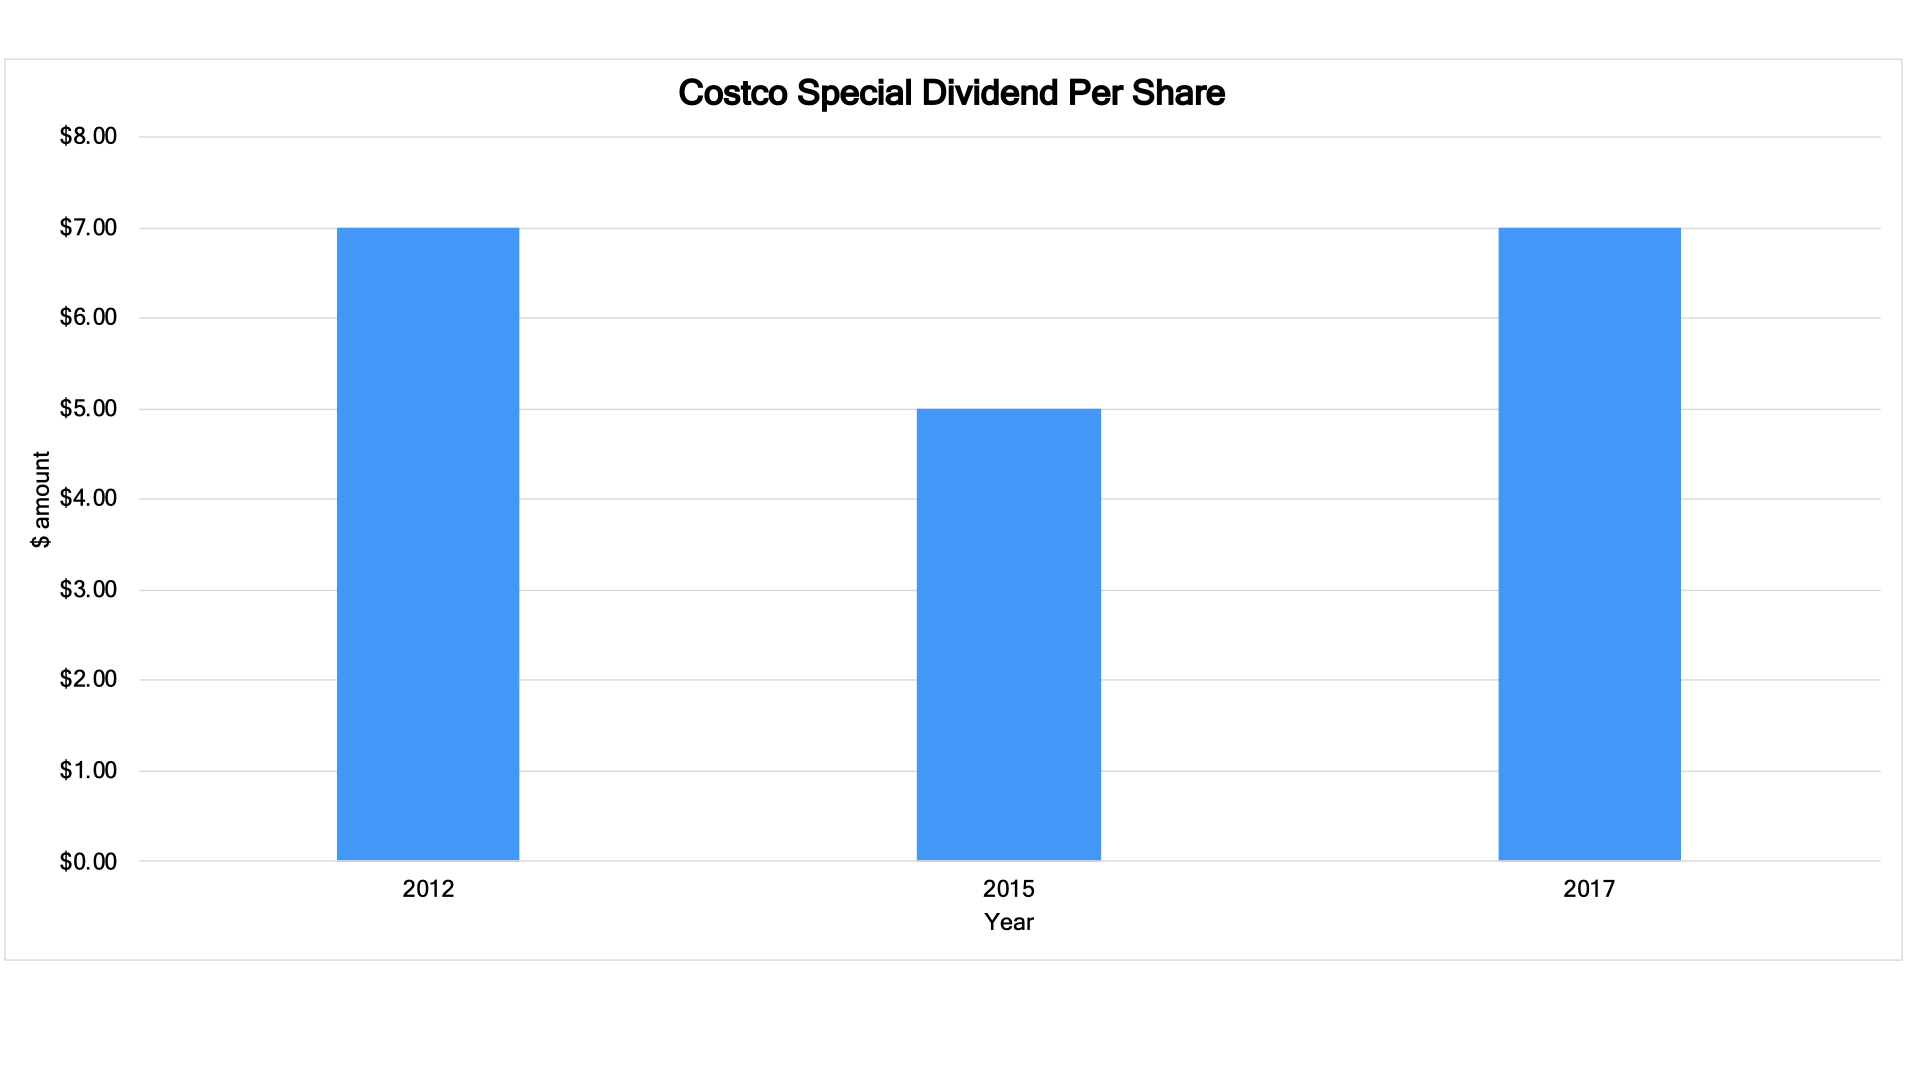 bar graph of costco's special dividends per share